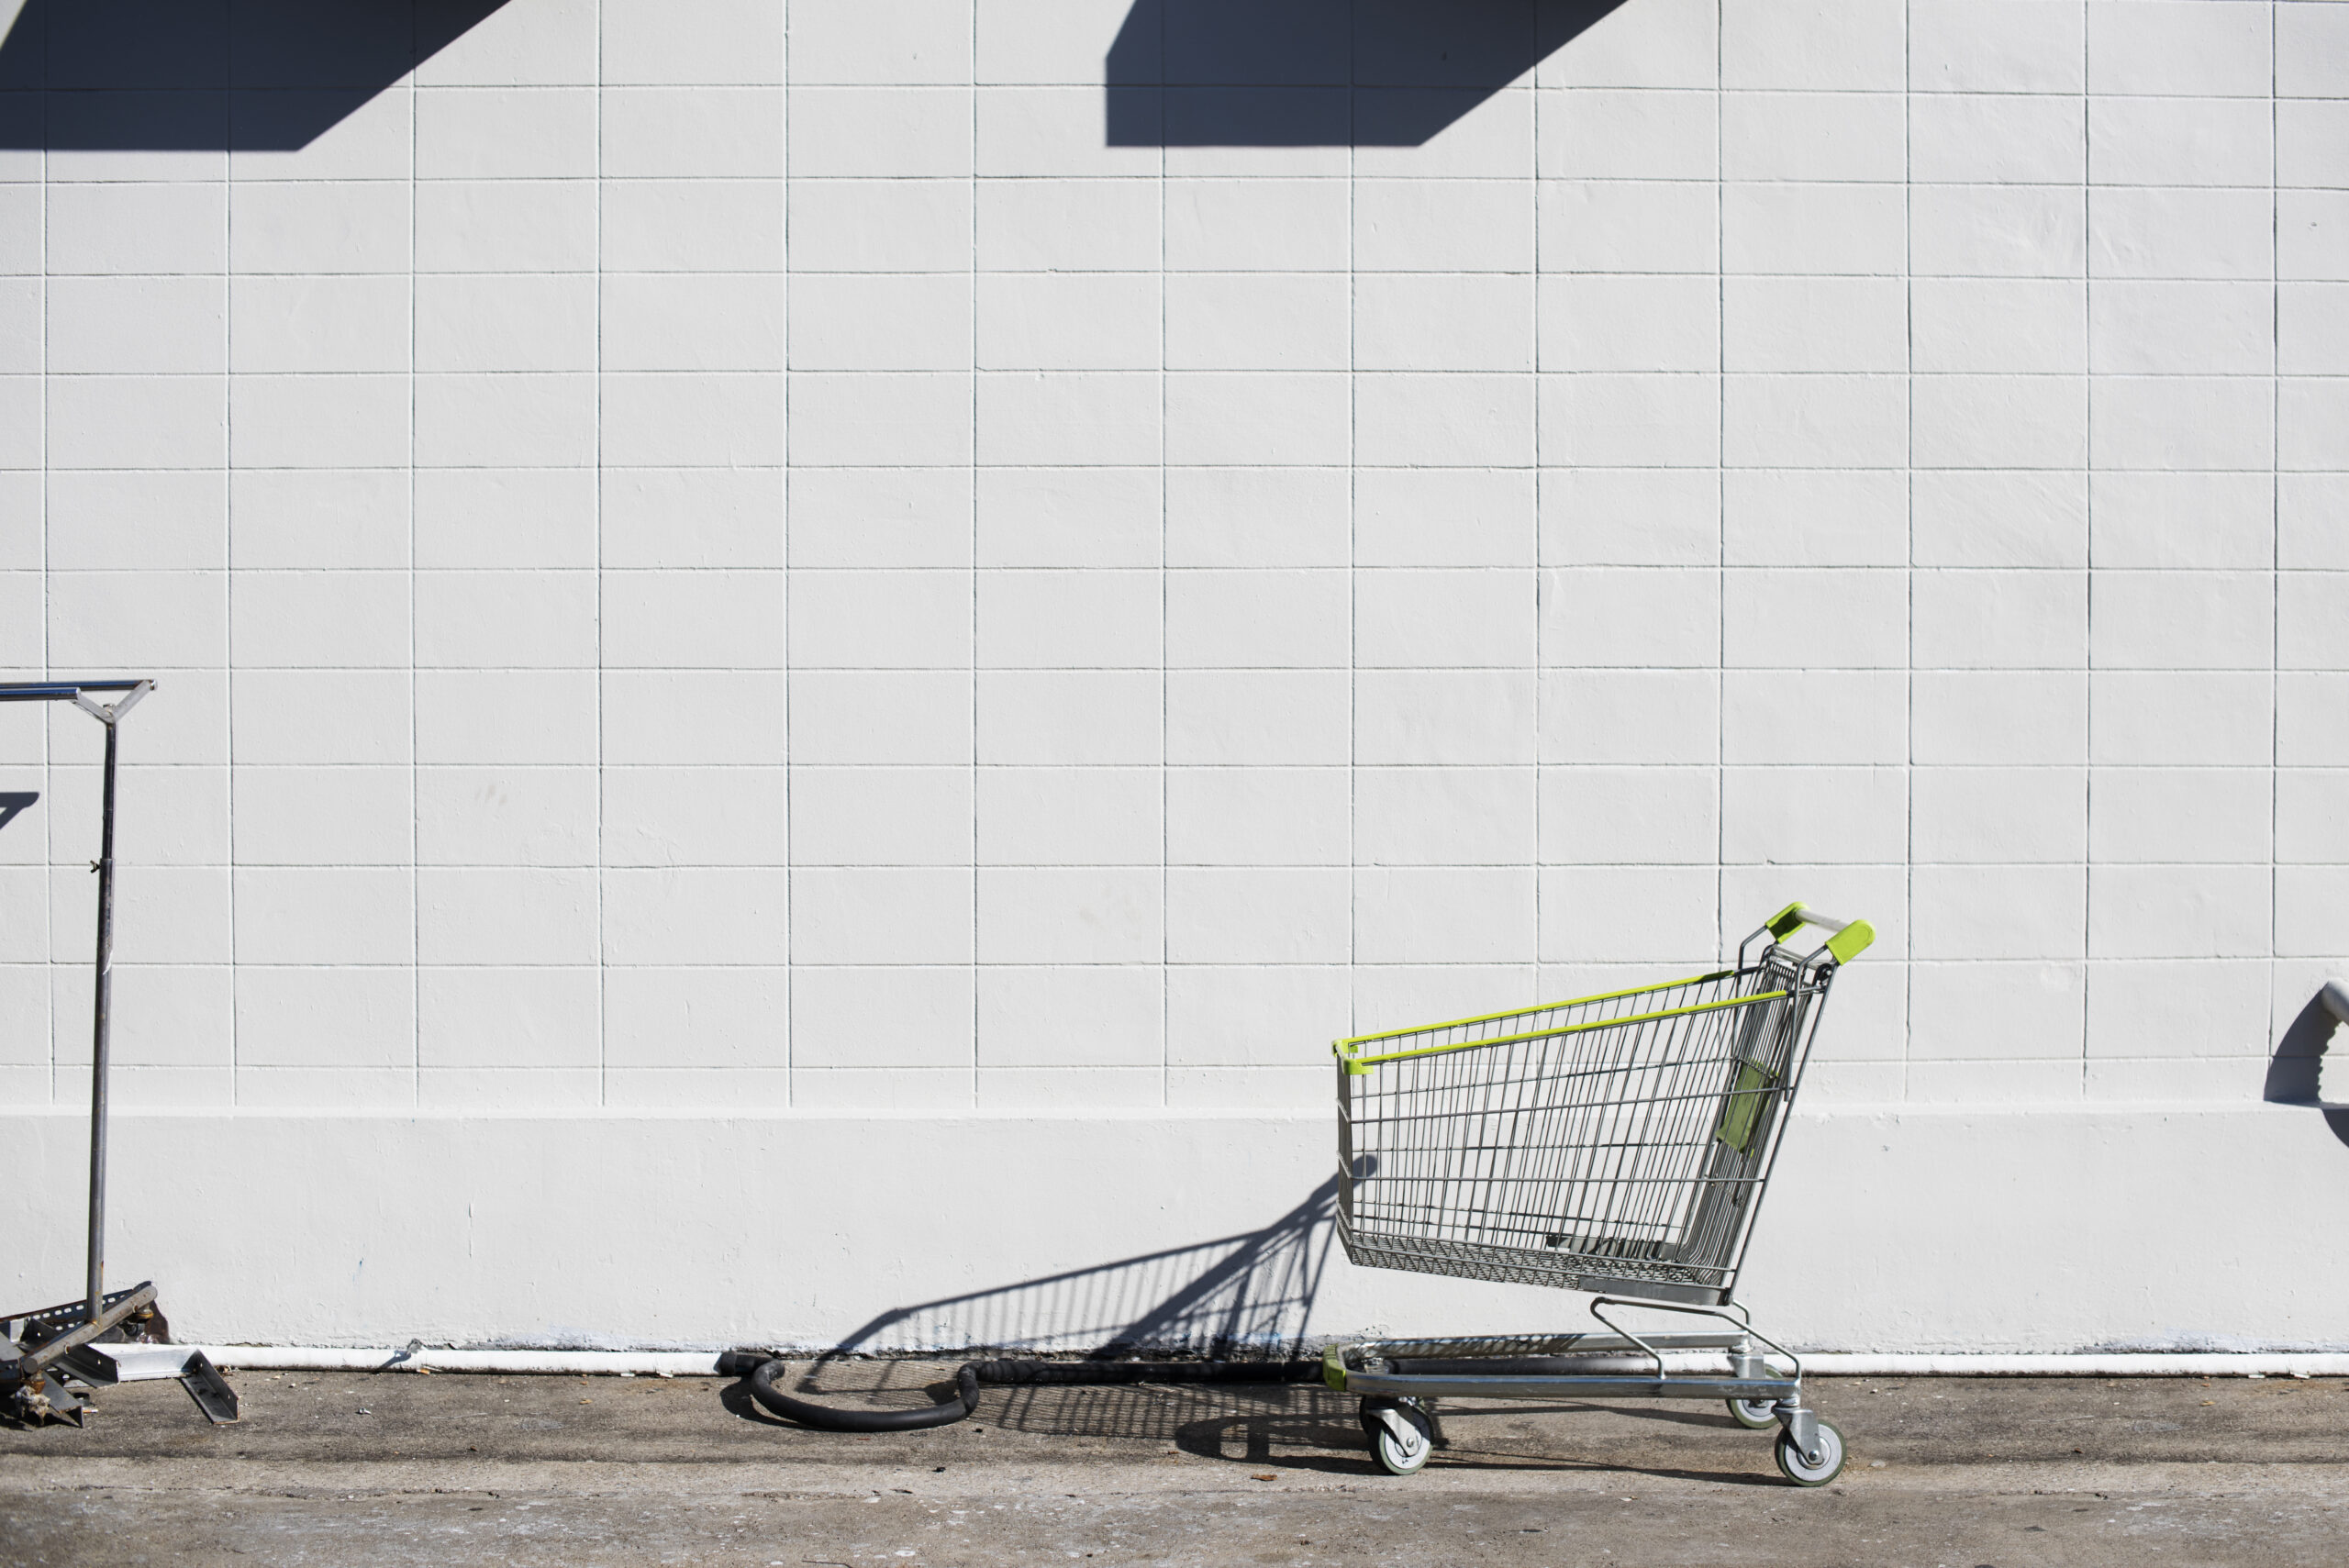 How to Reduce Shopping Cart Abandonment